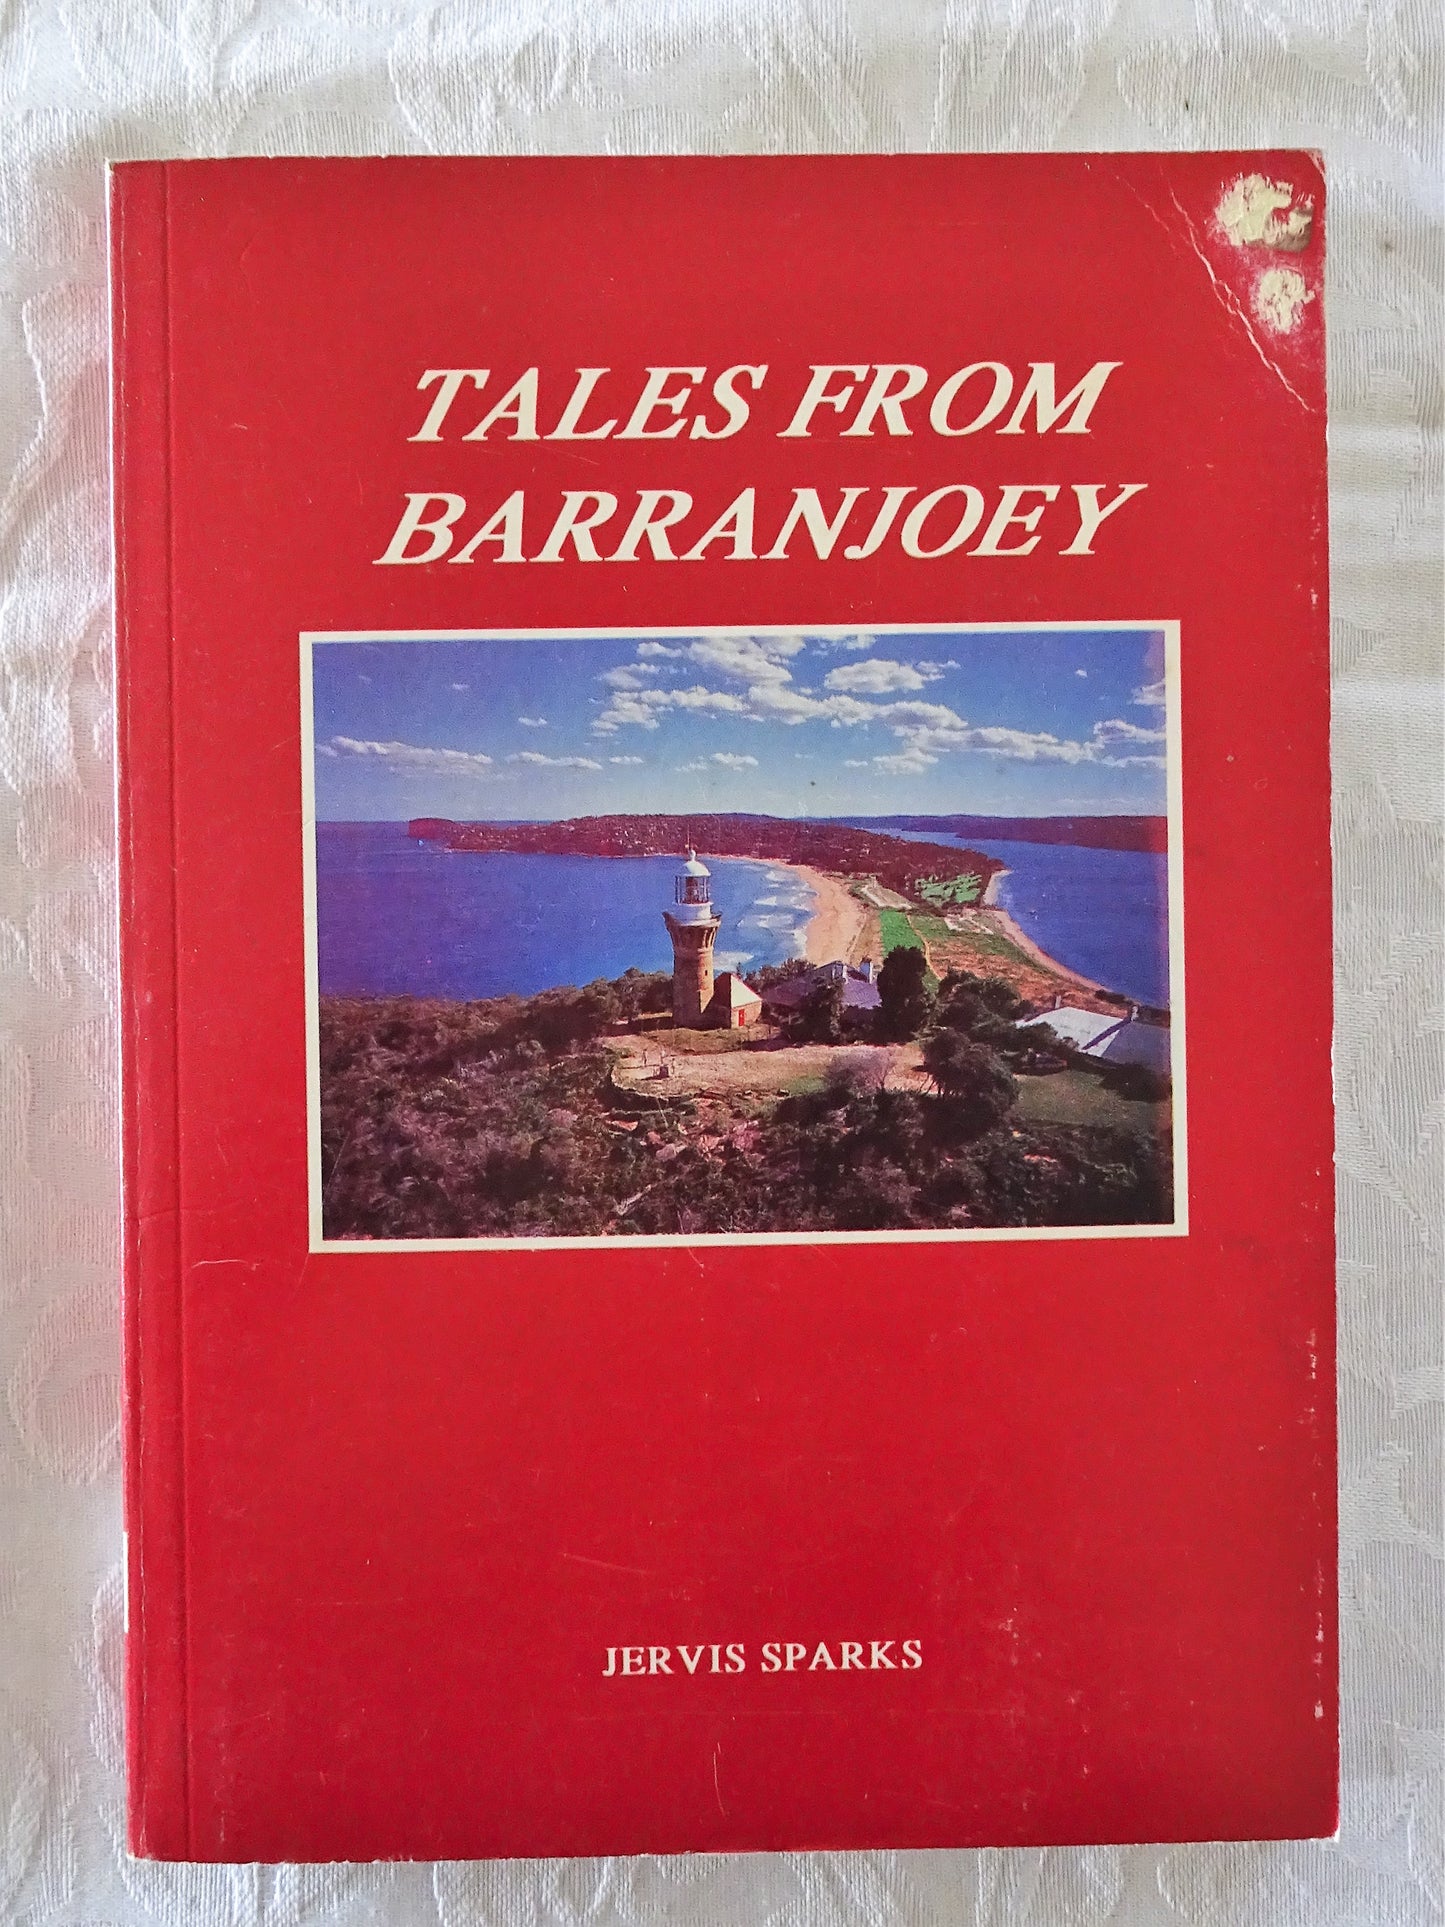 Tales From Barranjoey by Jervis Sparks